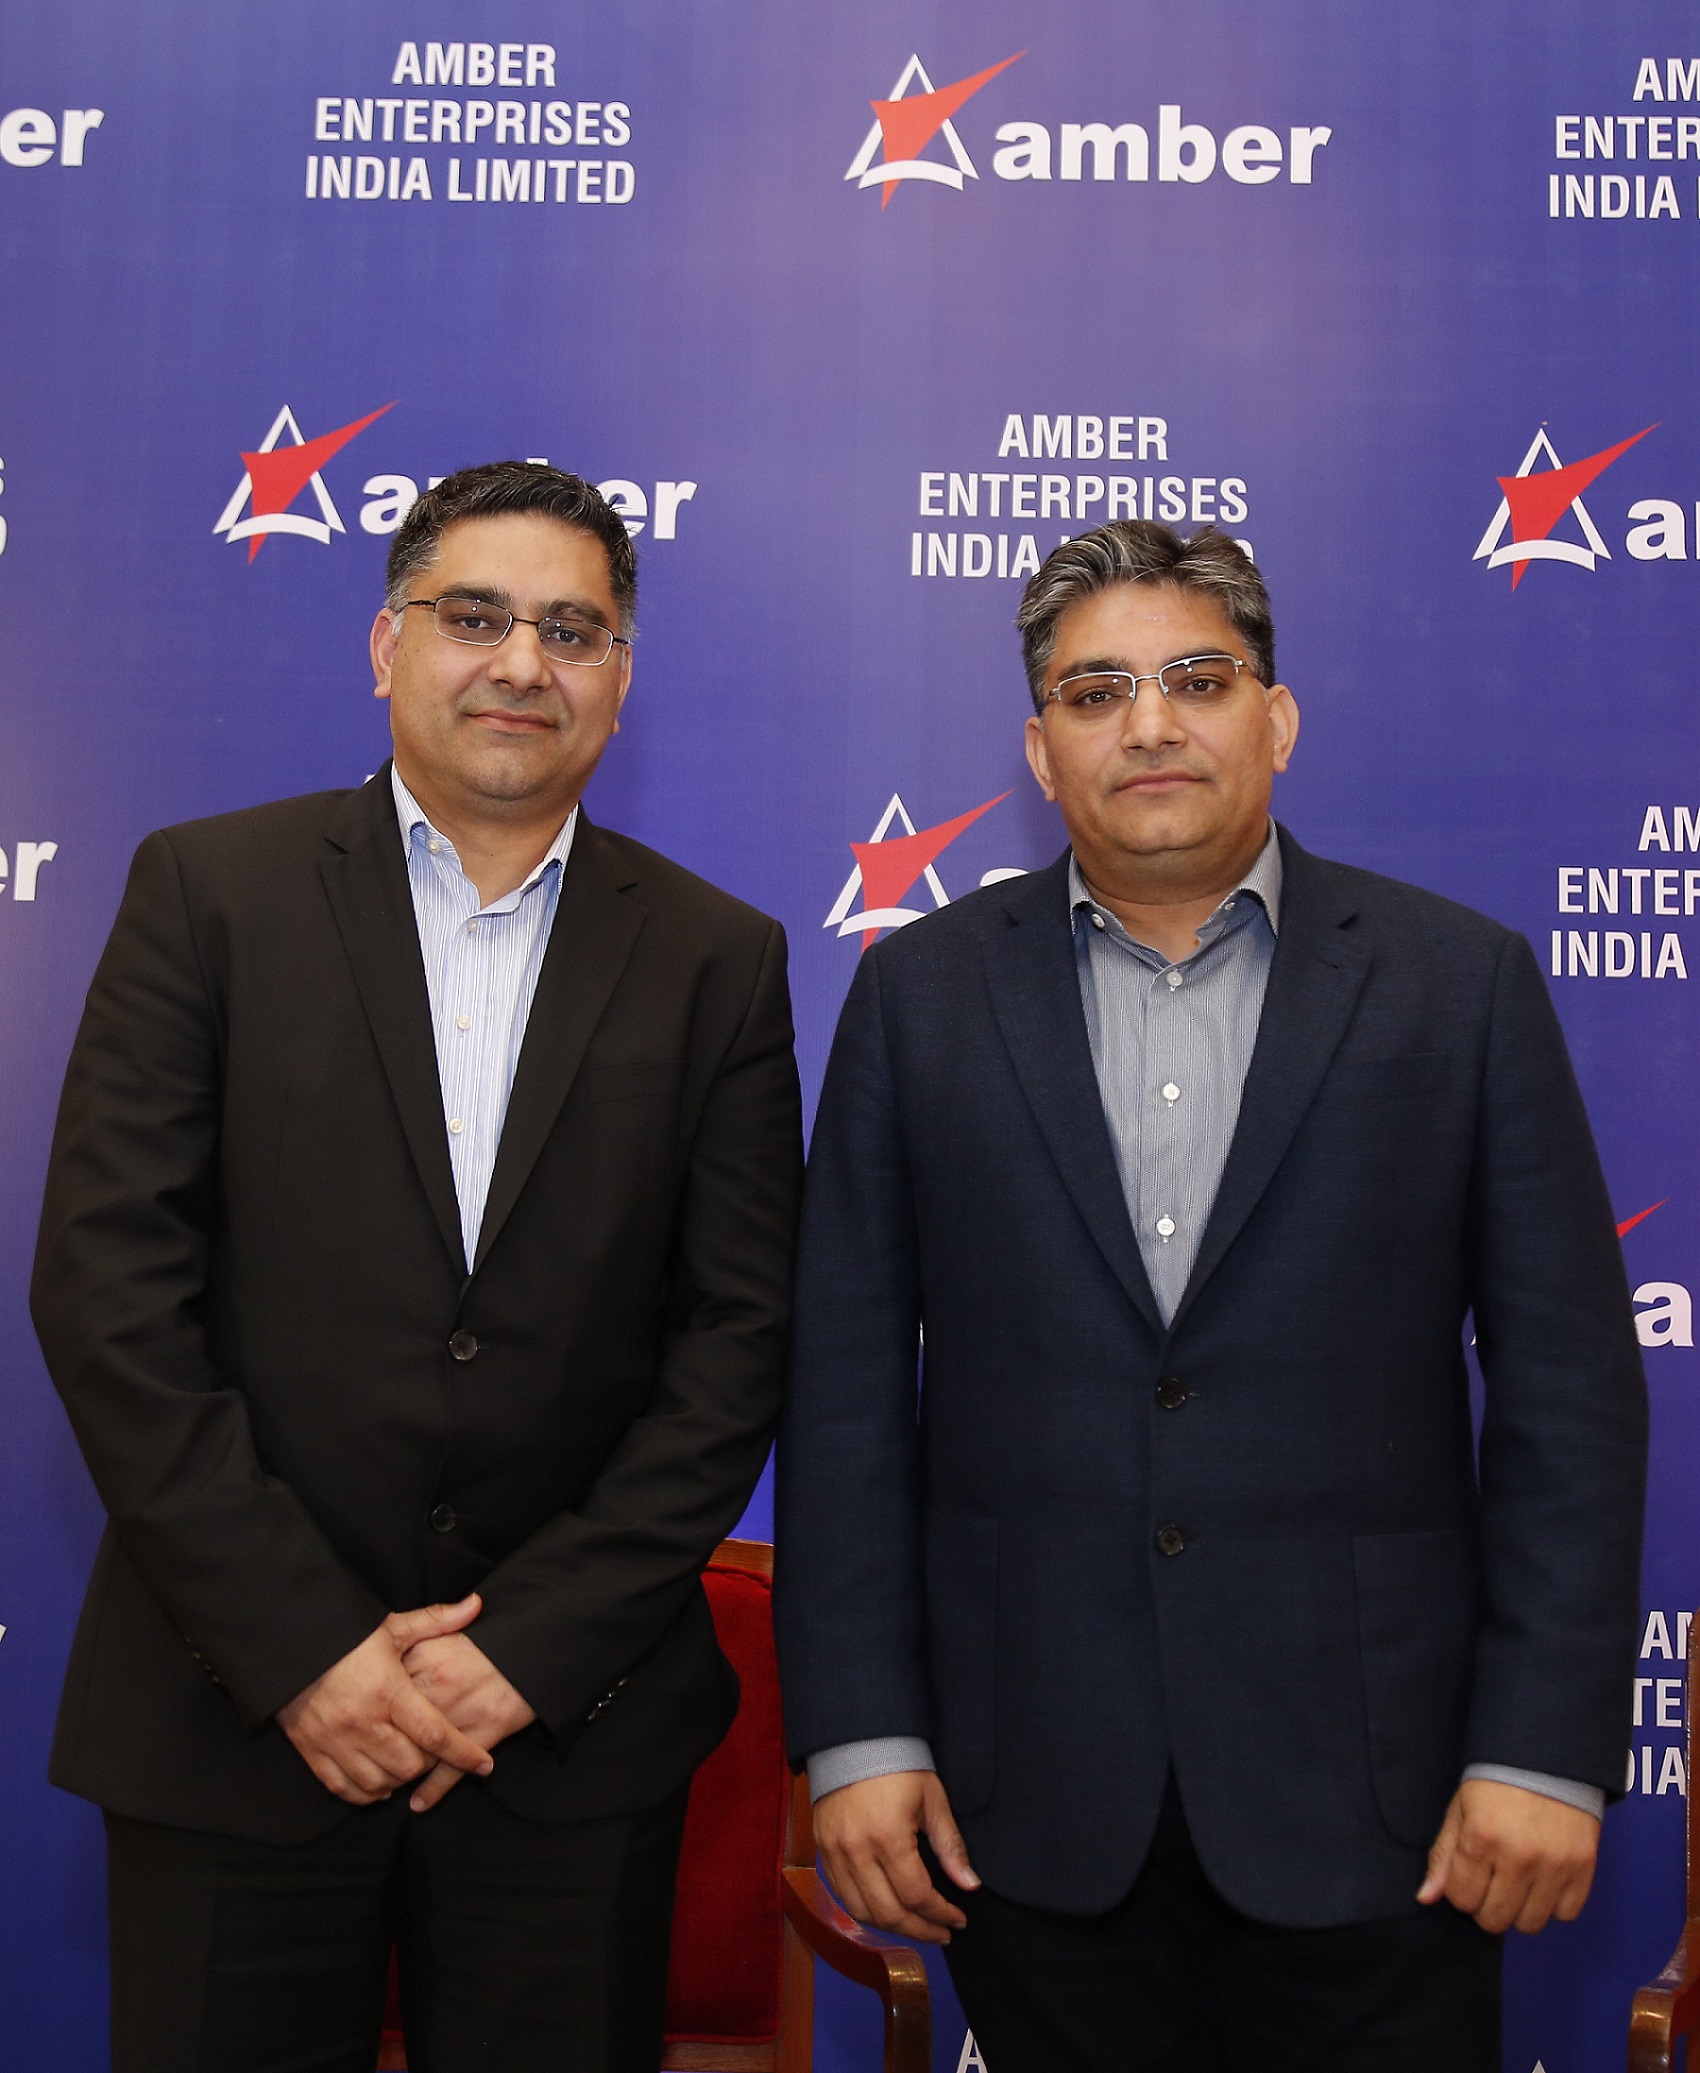 (L-R): Mr. Daljit Singh, Managing Director, Amber Enterprises India Limited and Mr. Jasbir Singh, Chairman and Chief Executive Officer, Amber Enterprises India Limited / GPN